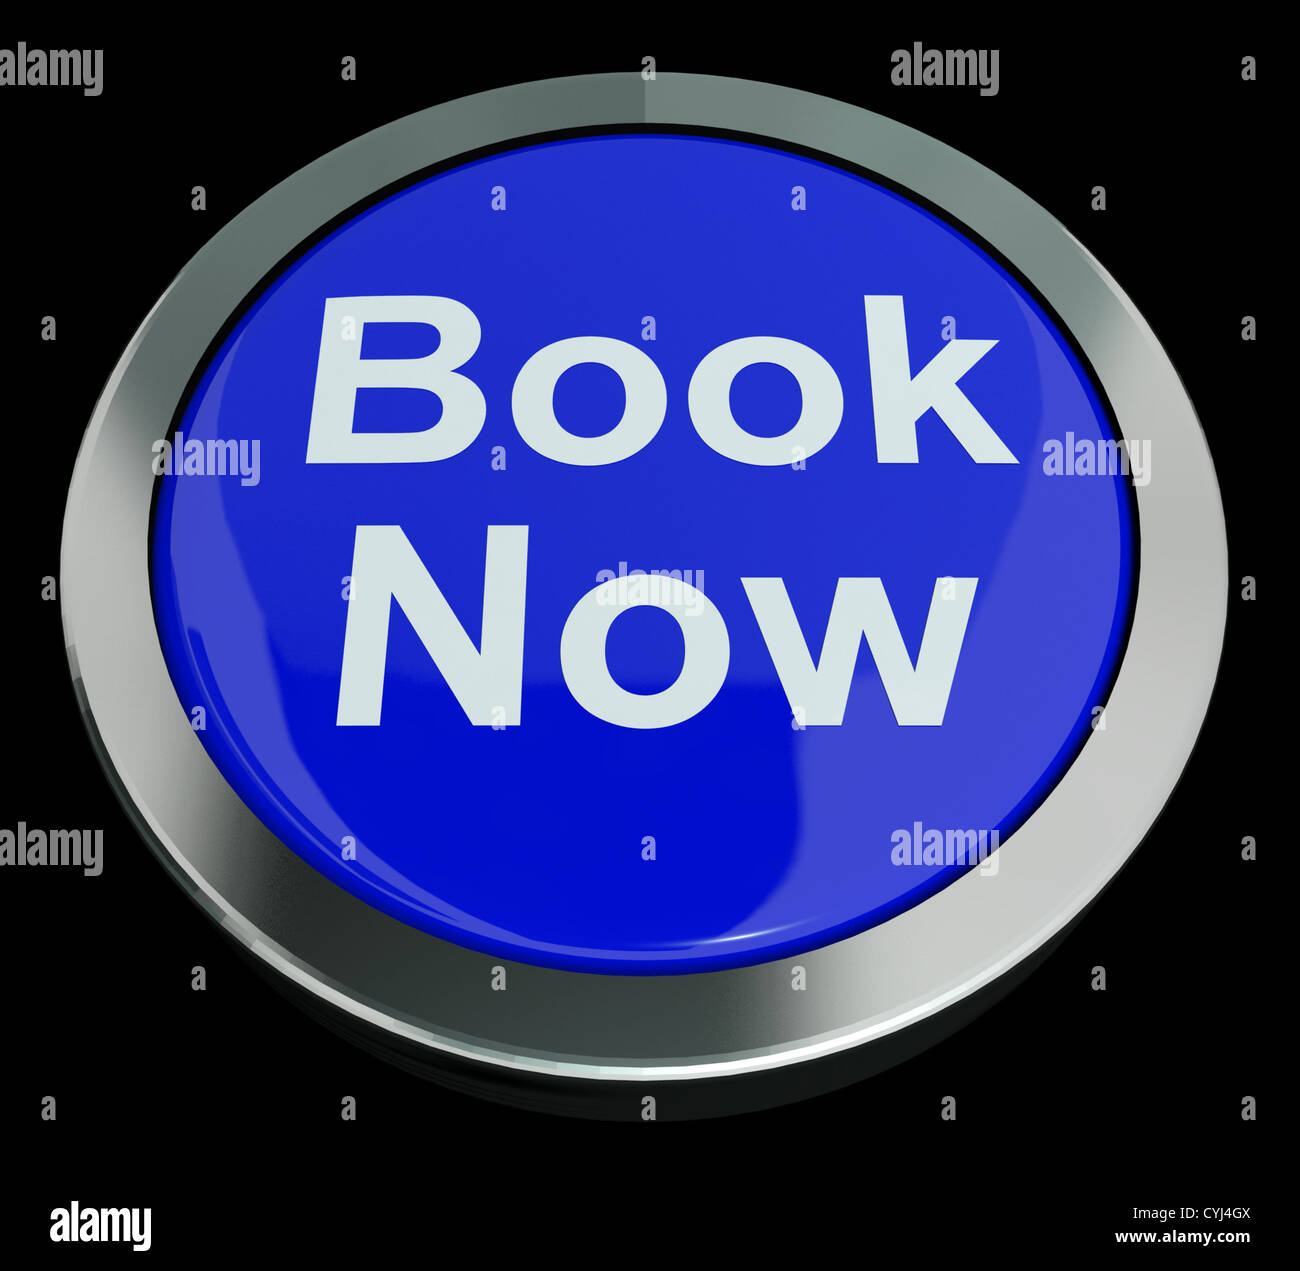 Blue Book Now Button For Hotel Or Flight Reservations Stock Photo